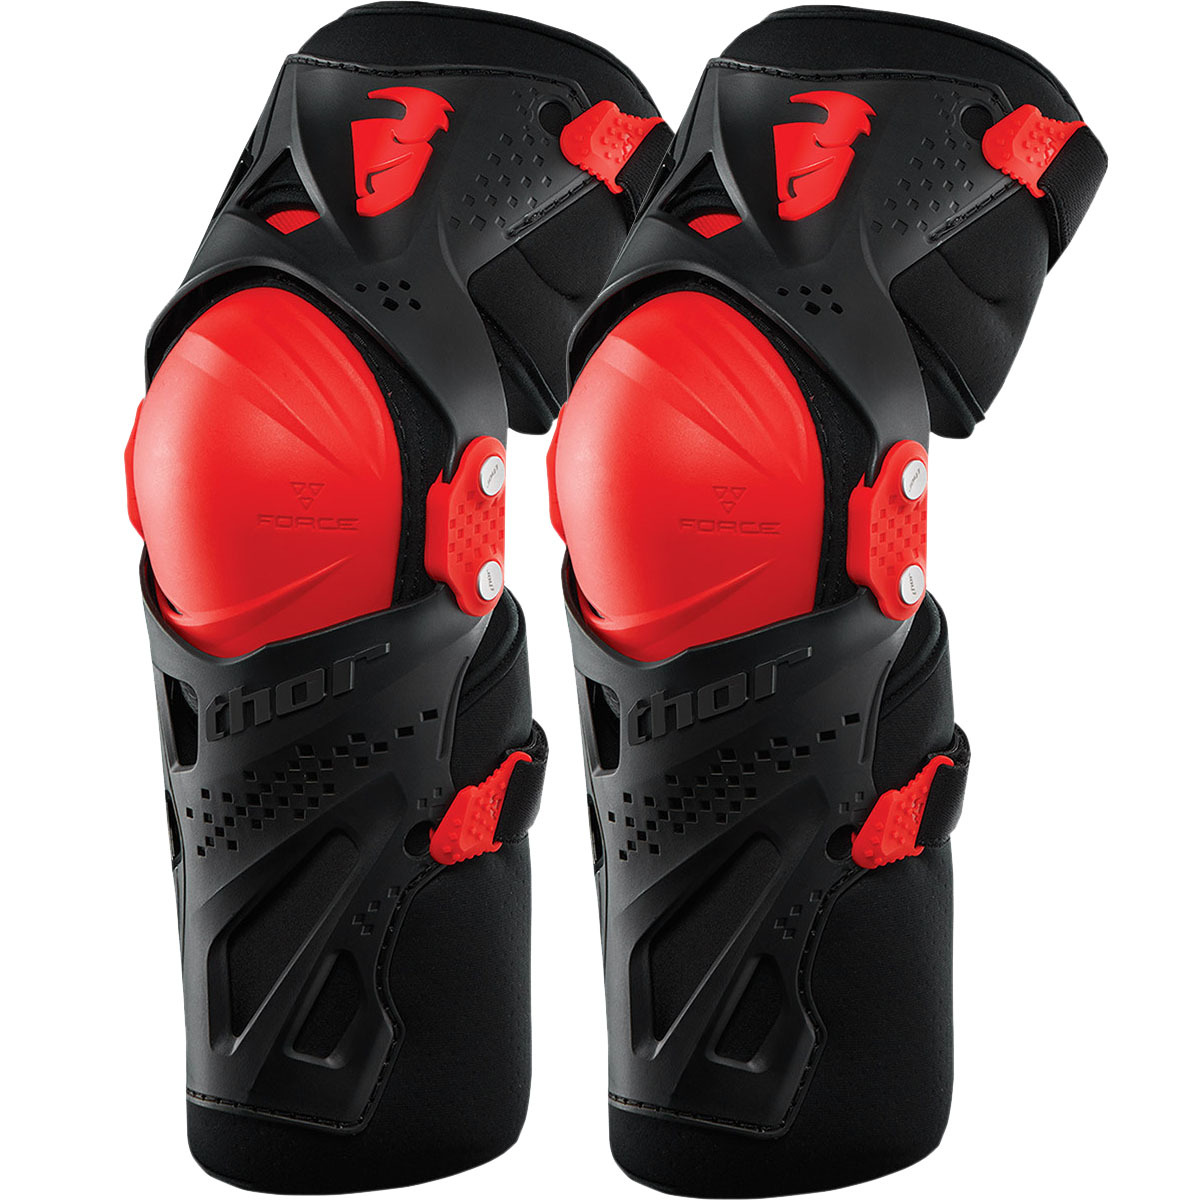 Thor MX Force XP Adult Red Knee Guards at MXstore